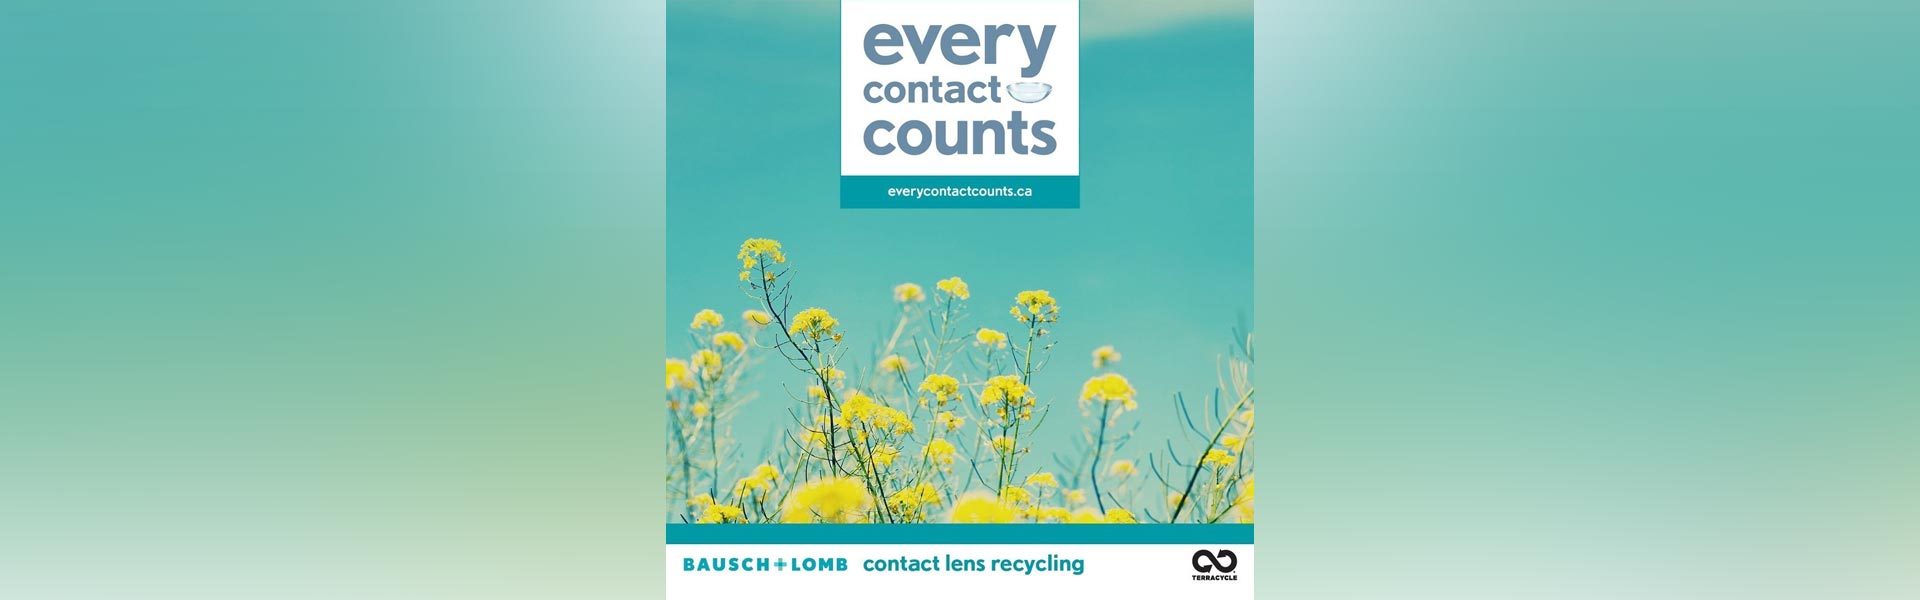 Every Contact Counts - Contact Lens Recycling